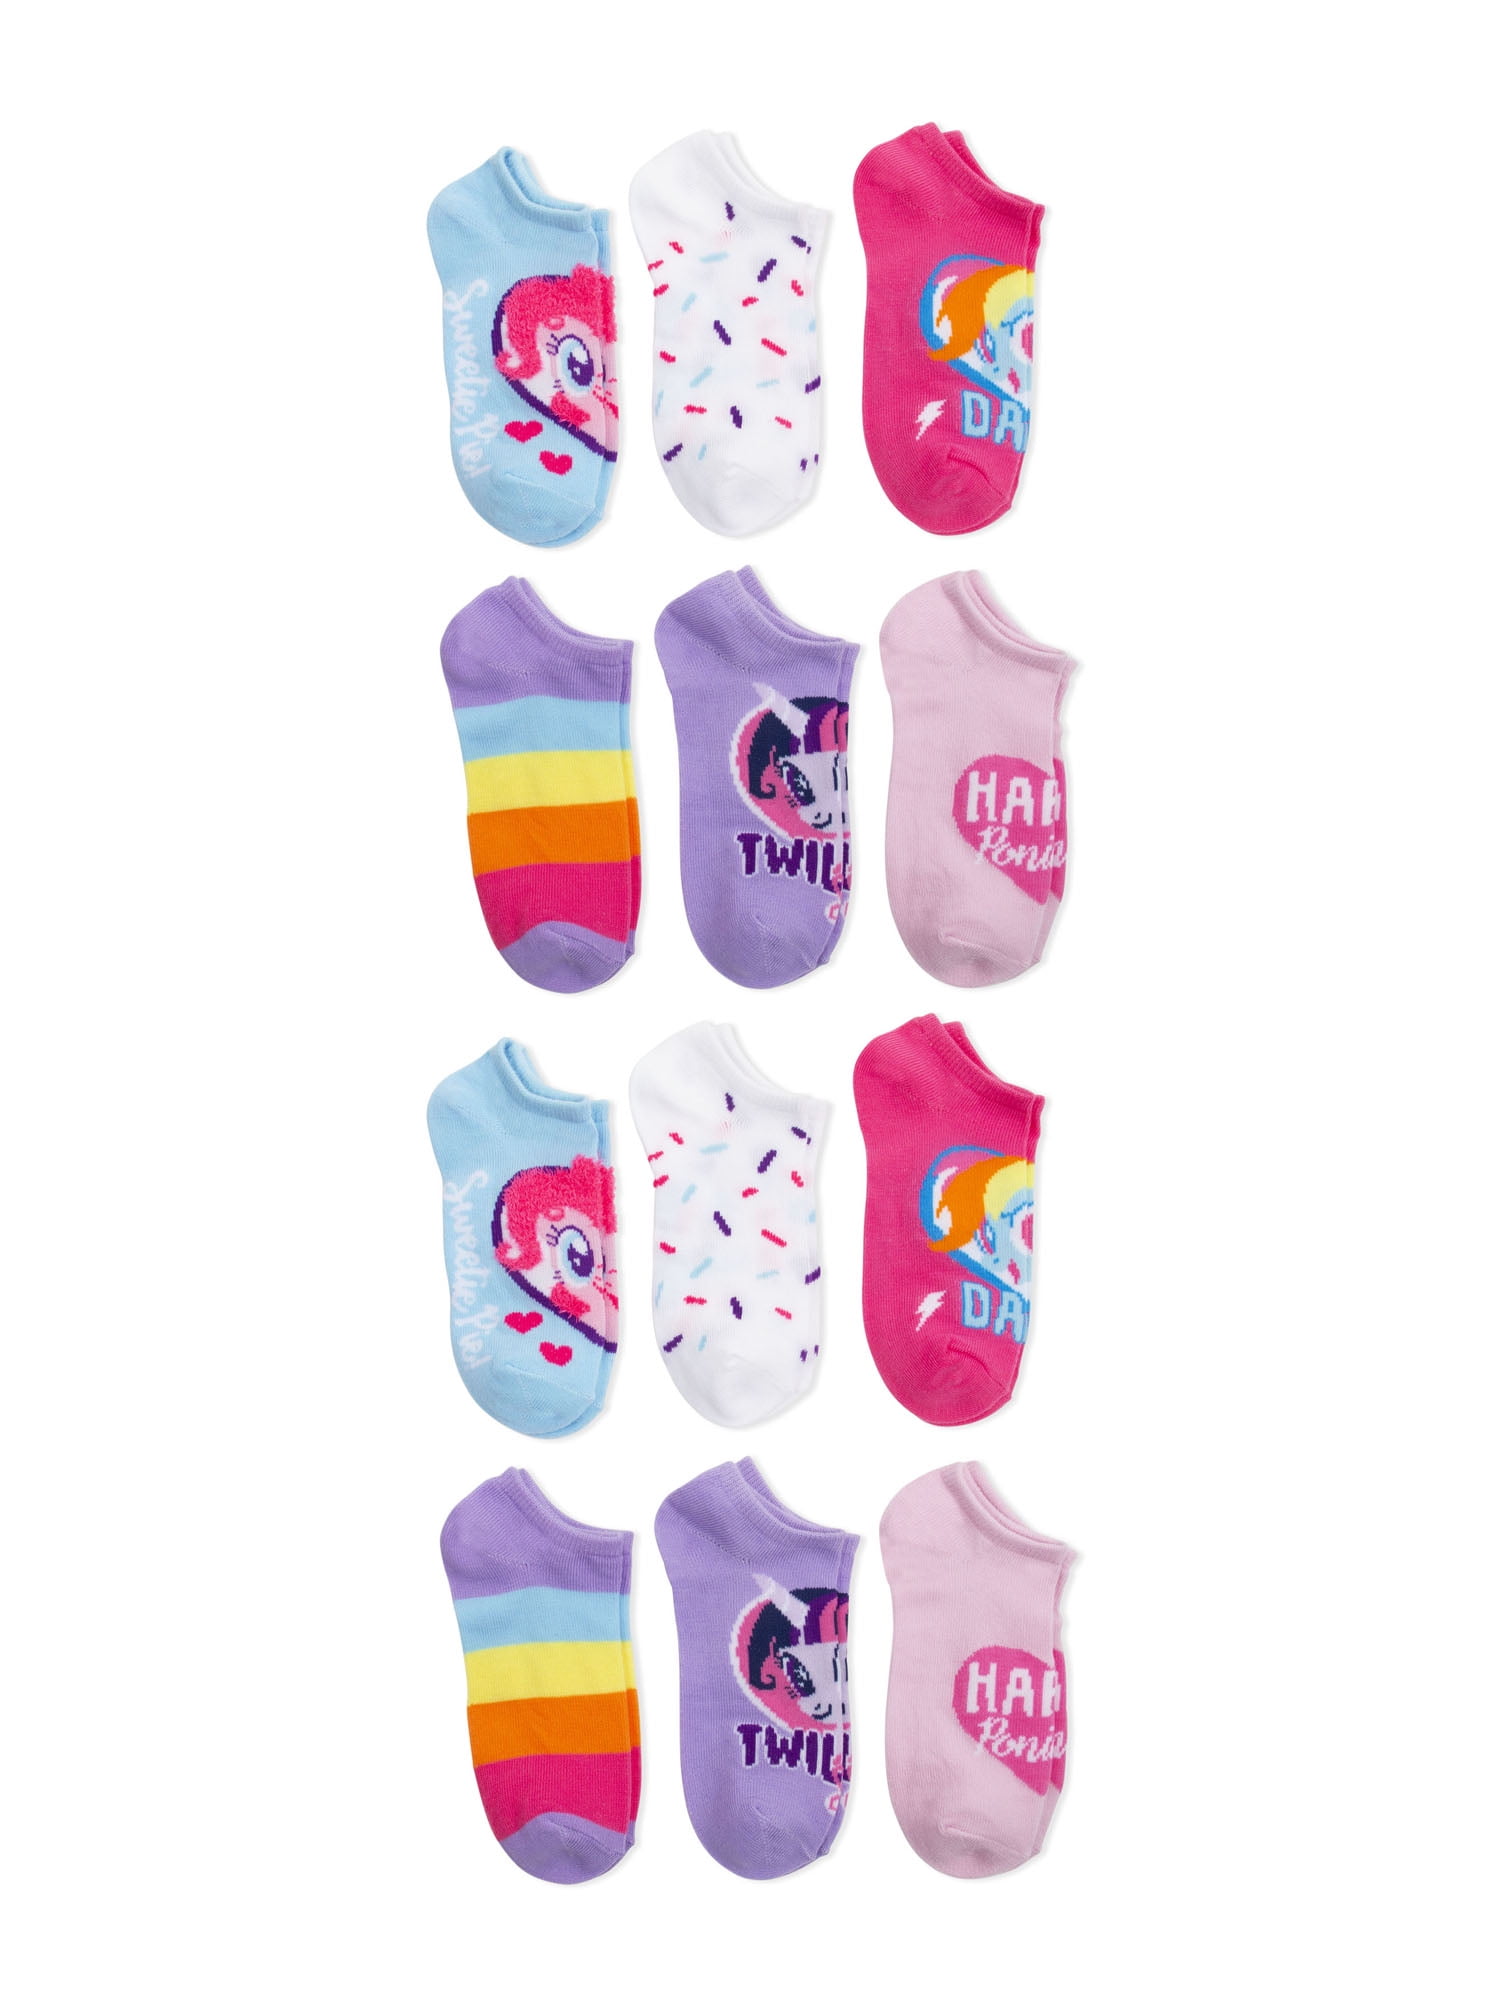 My Little Pony Girls Kids 5 Pair No Show Socks Size 6-8.5 Shoes 7.5-3.5 NEW 